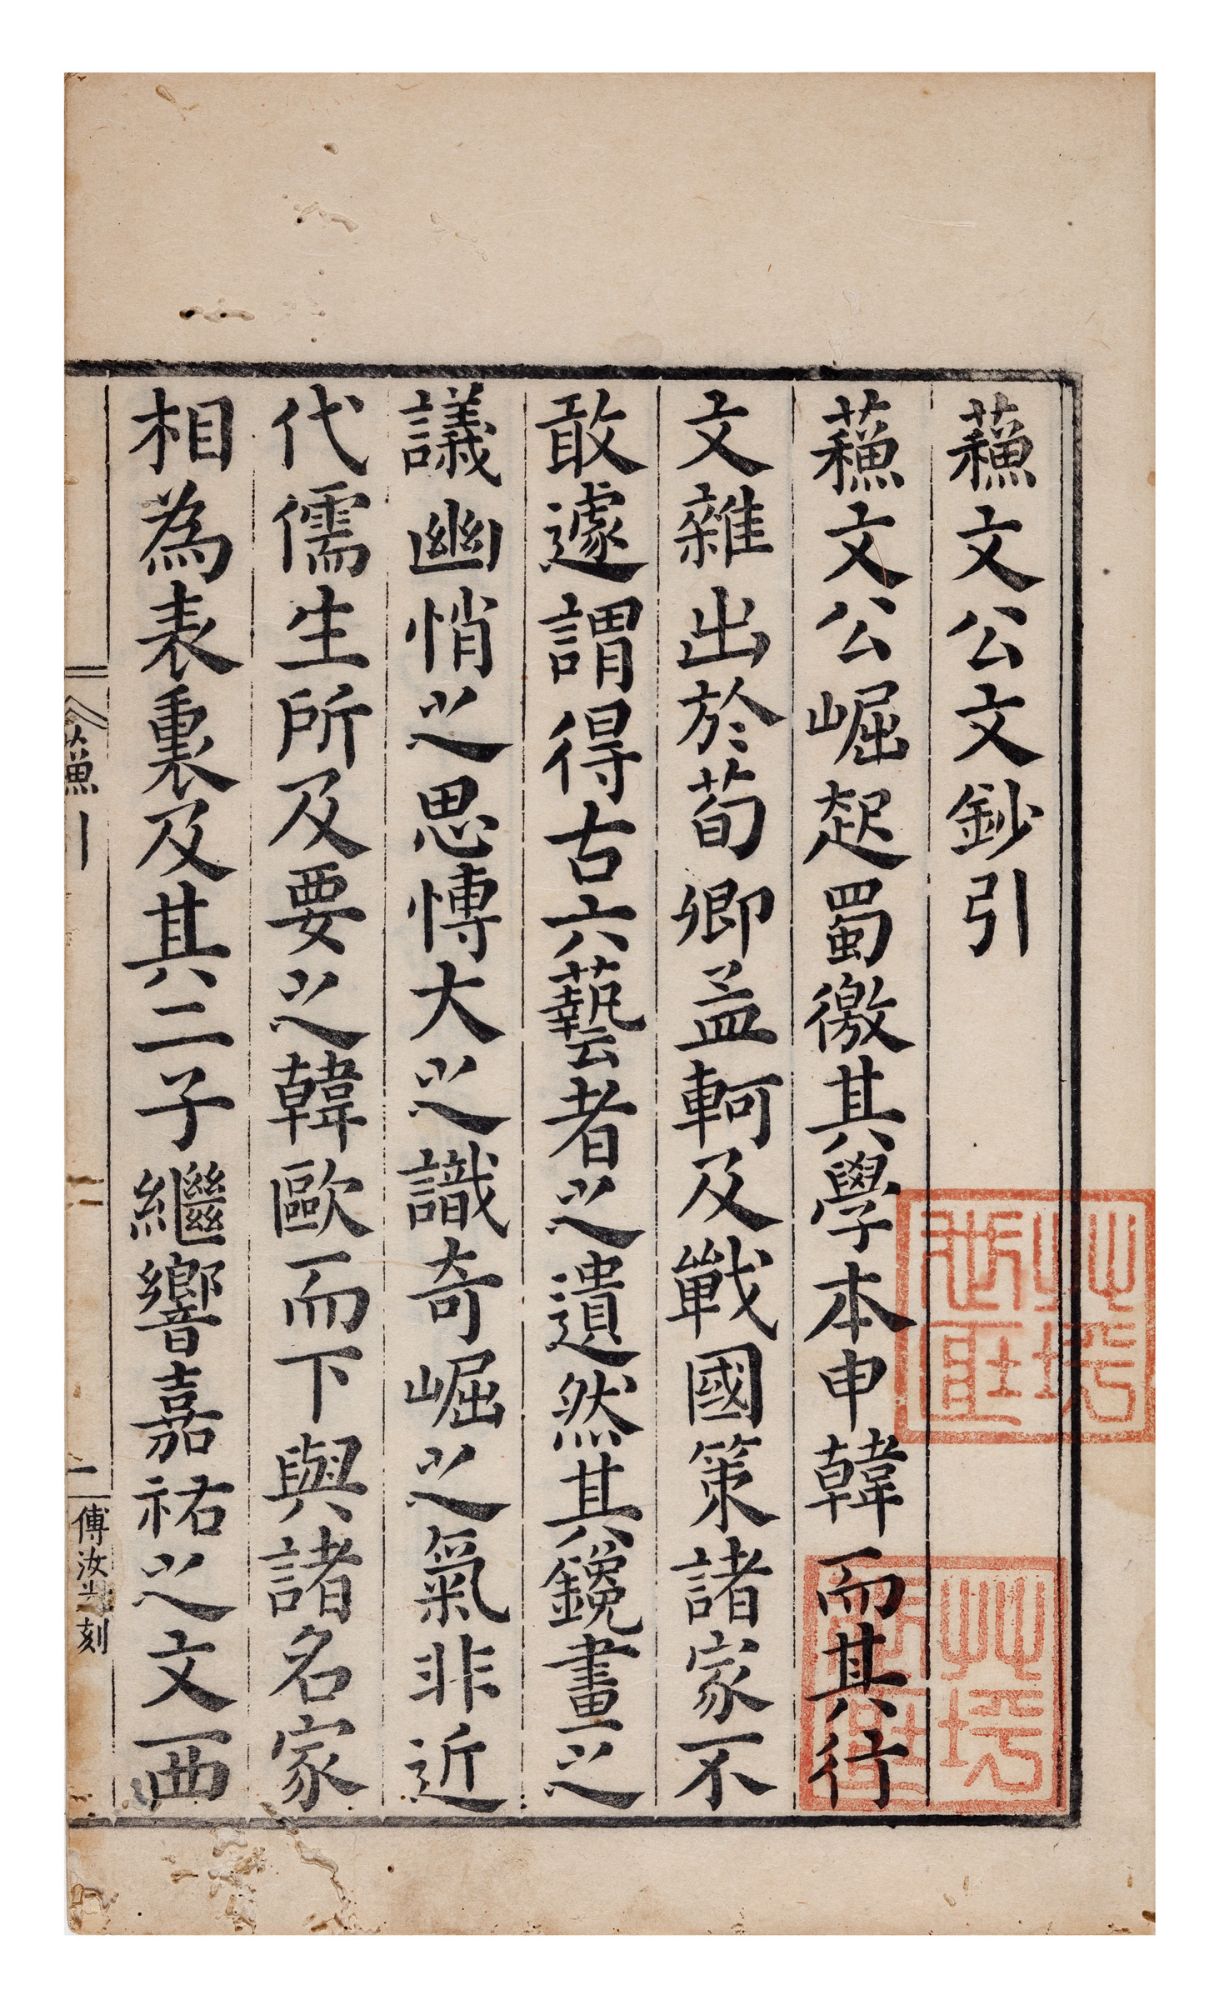 Su Wen gong wen chao 蘇文公文鈔 or Song da jia Su Wen gong wen chao 宋大家蘇文公文鈔  Copied Writings of the Lettered Mr. Su